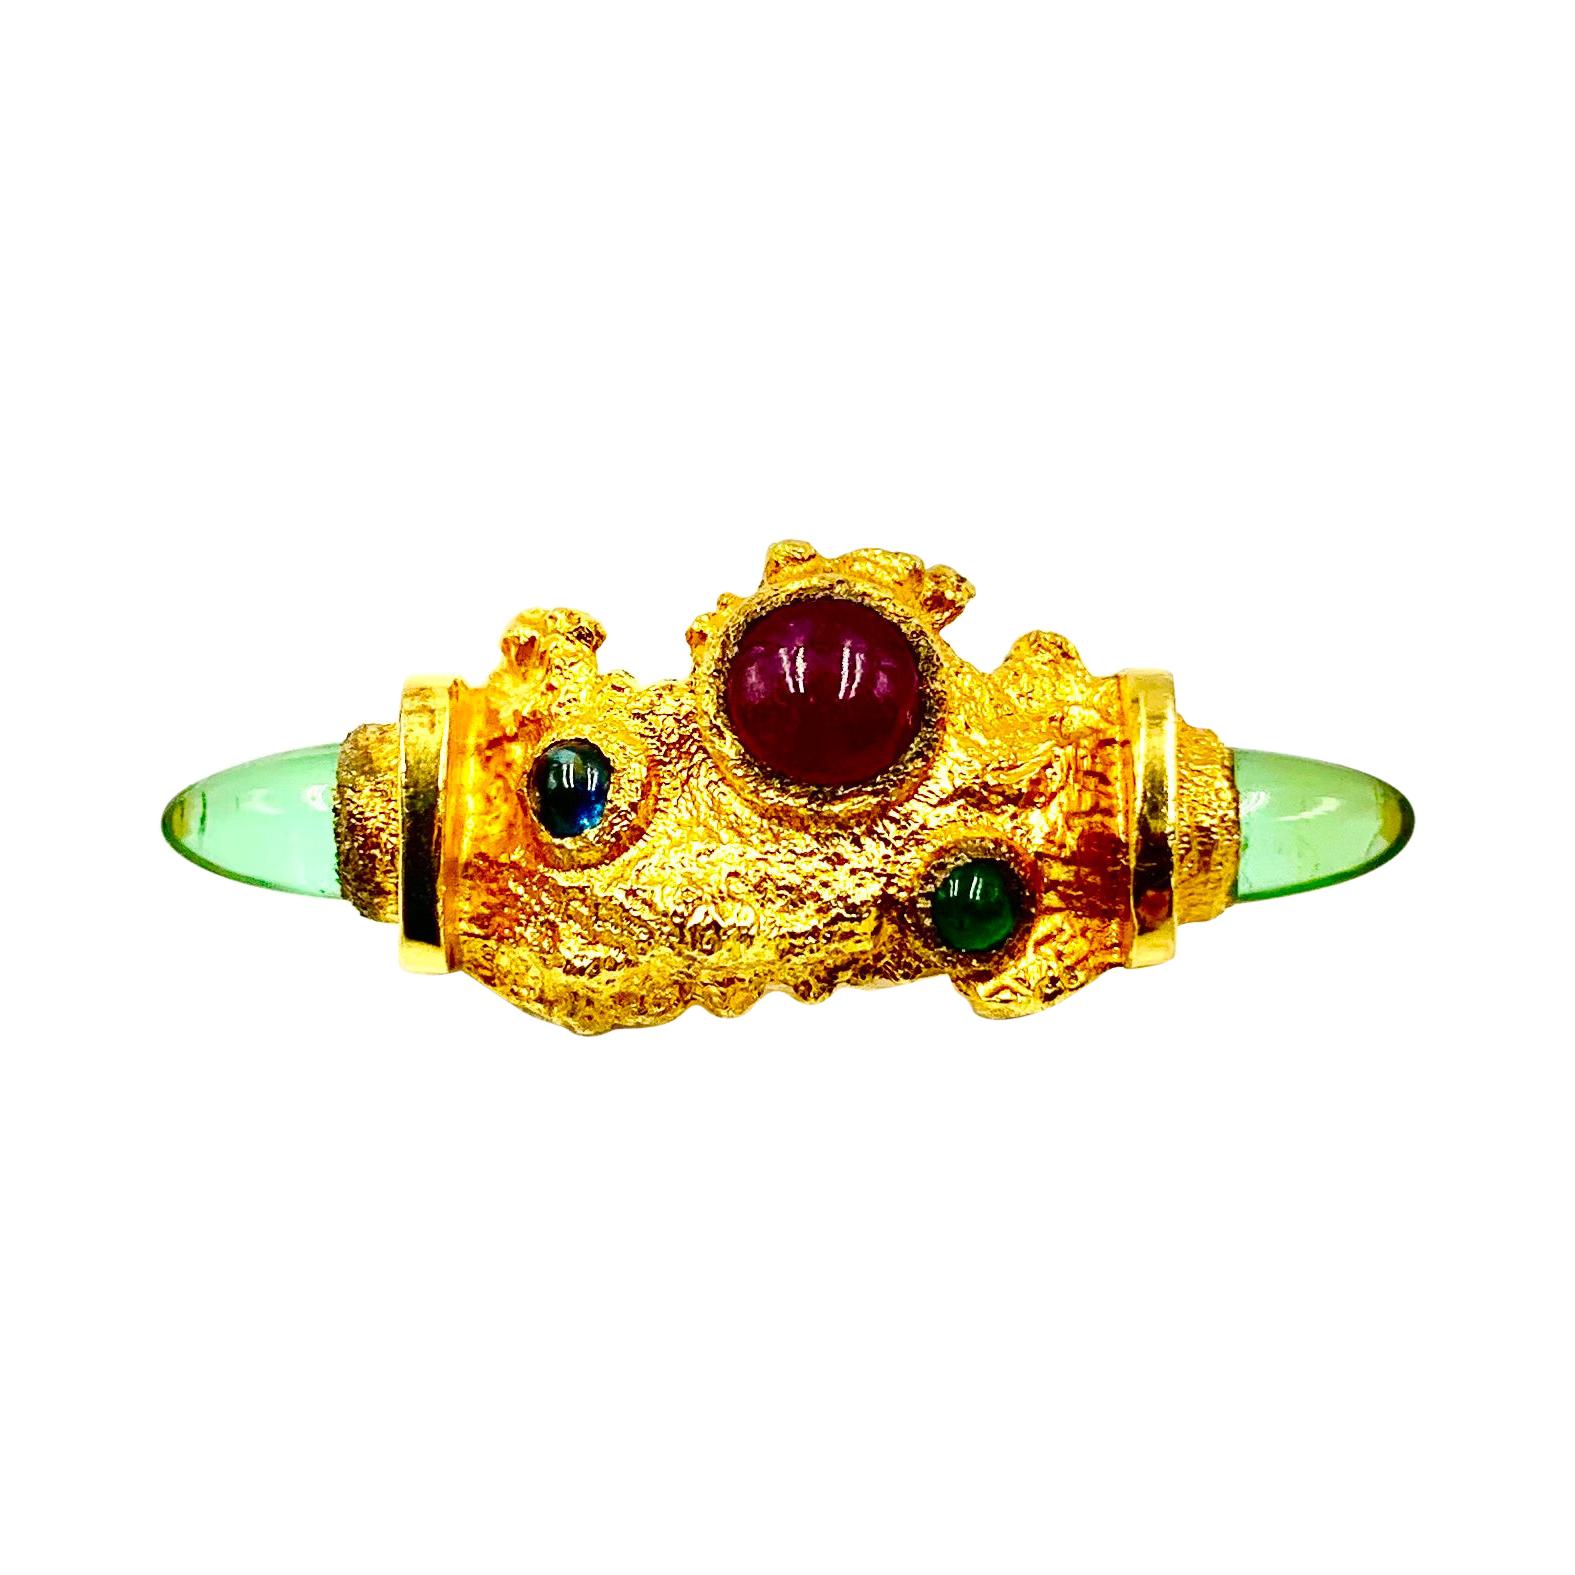 Modernist Textured 14k Gold Ruby, Emerald, Tourmaline Ring by F. Marshall, 1987 For Sale